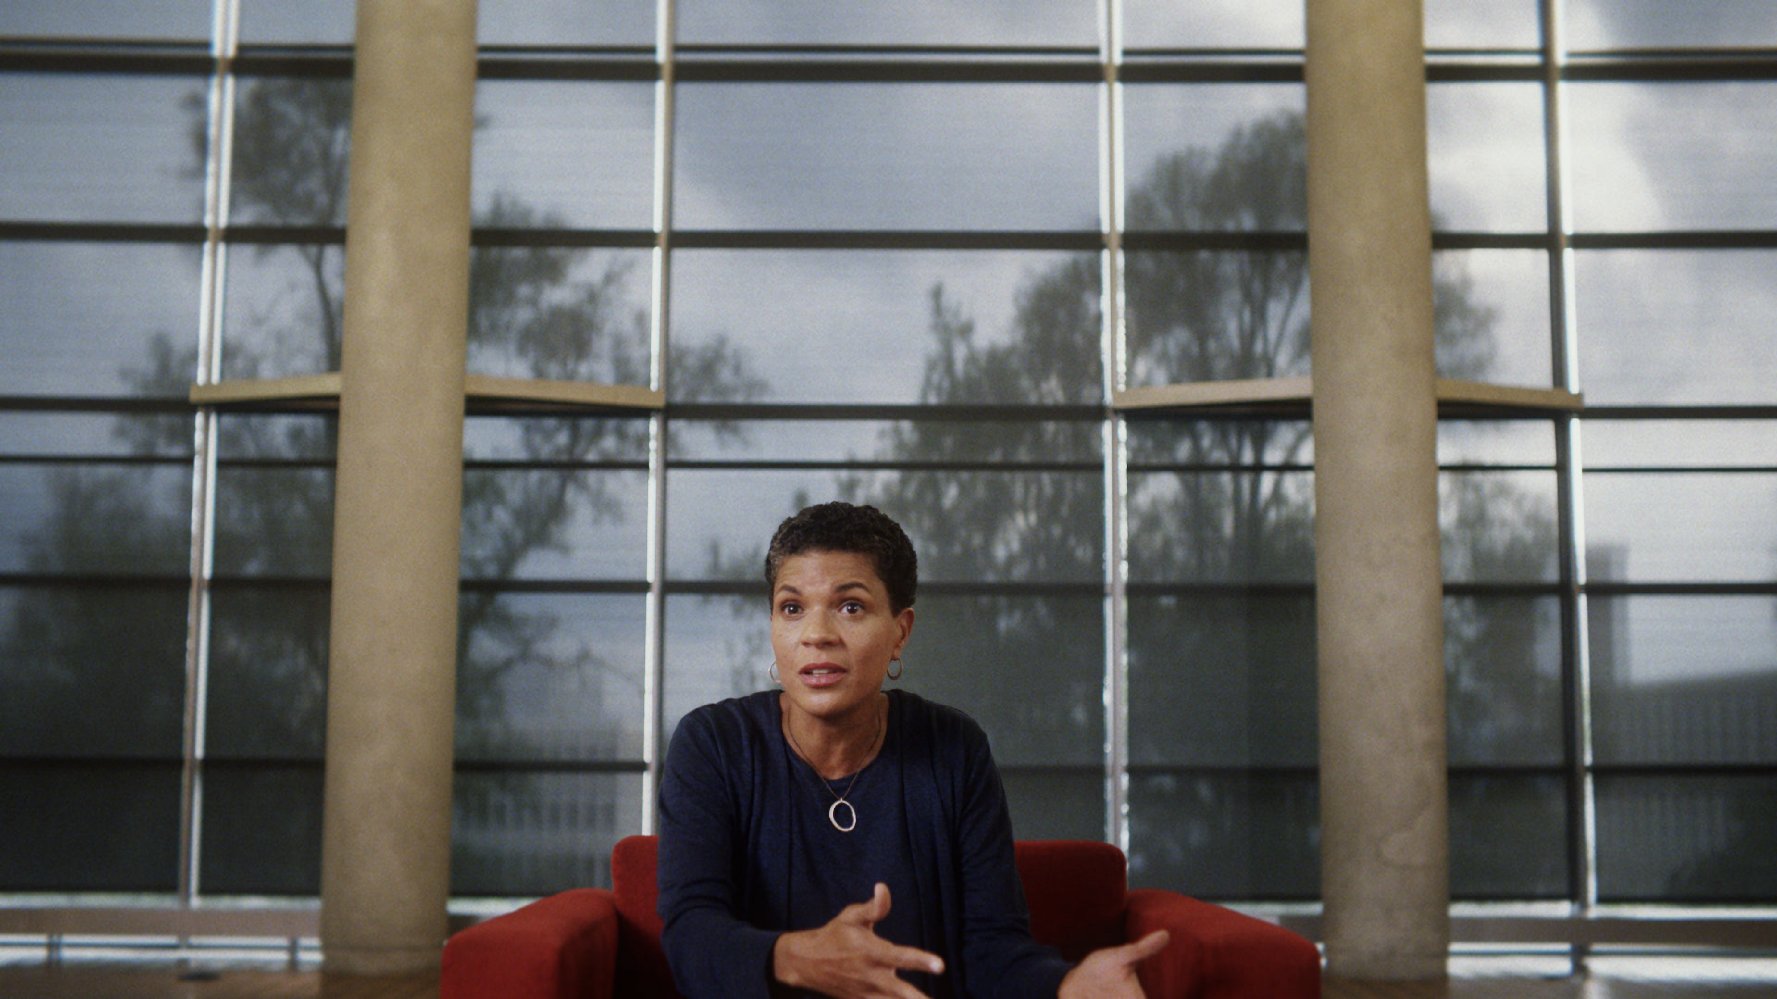 Michelle Alexander in 13th, one of the best Netflix movies